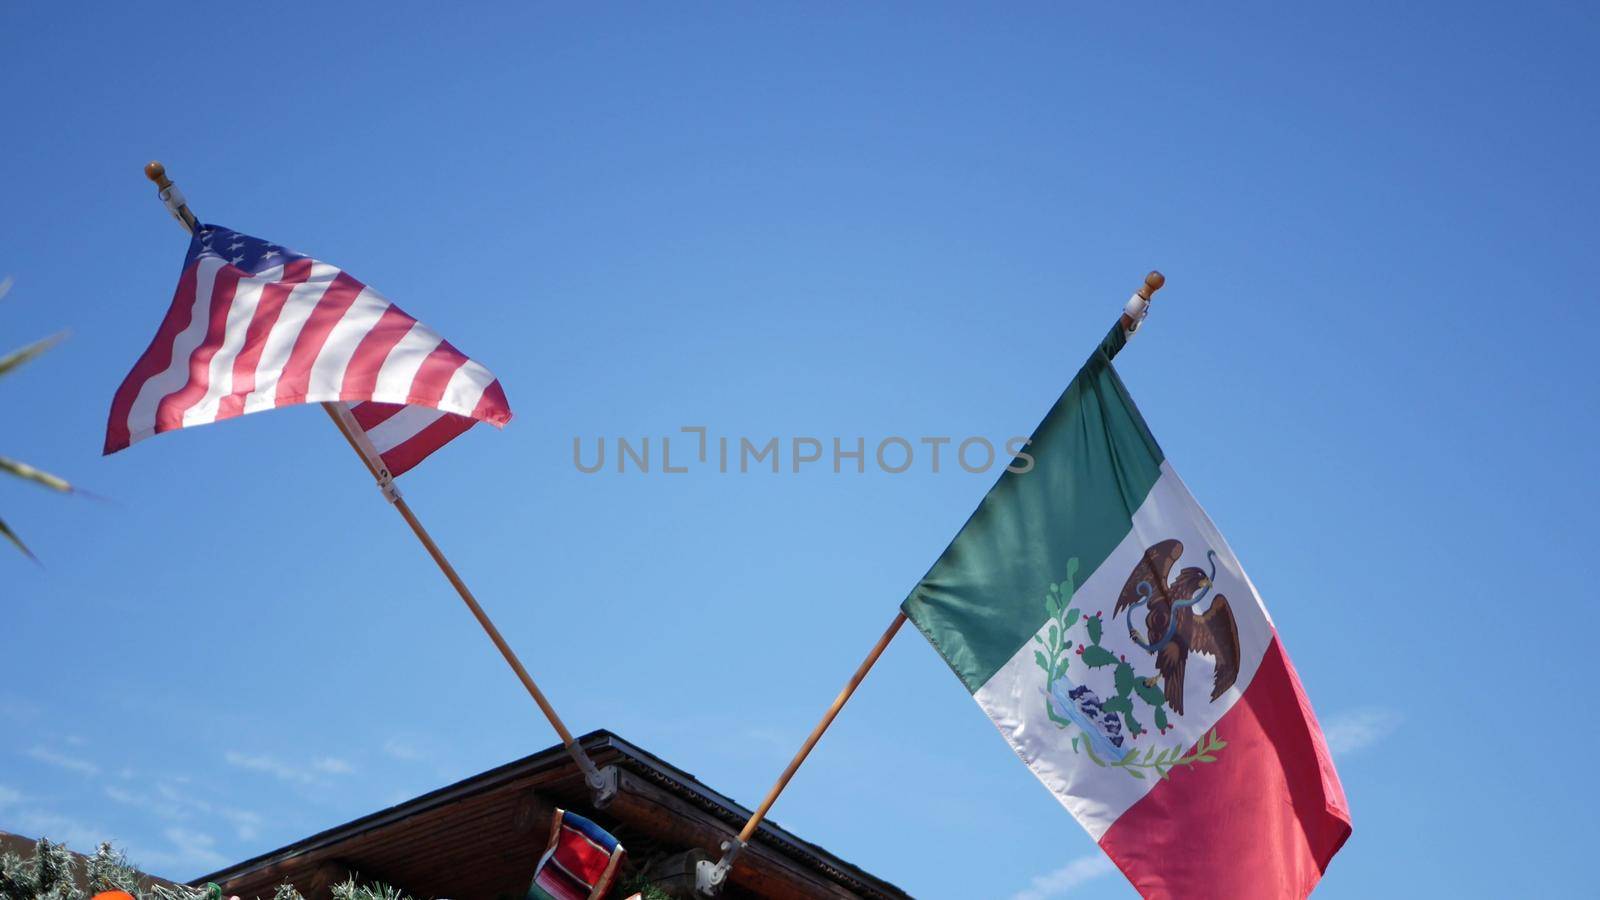 Mexican tricolor and American flag waving on wind. Two national icons of Mexico and United States against sky, San Diego, California, USA. Political symbol of border, relationship and togetherness by DogoraSun